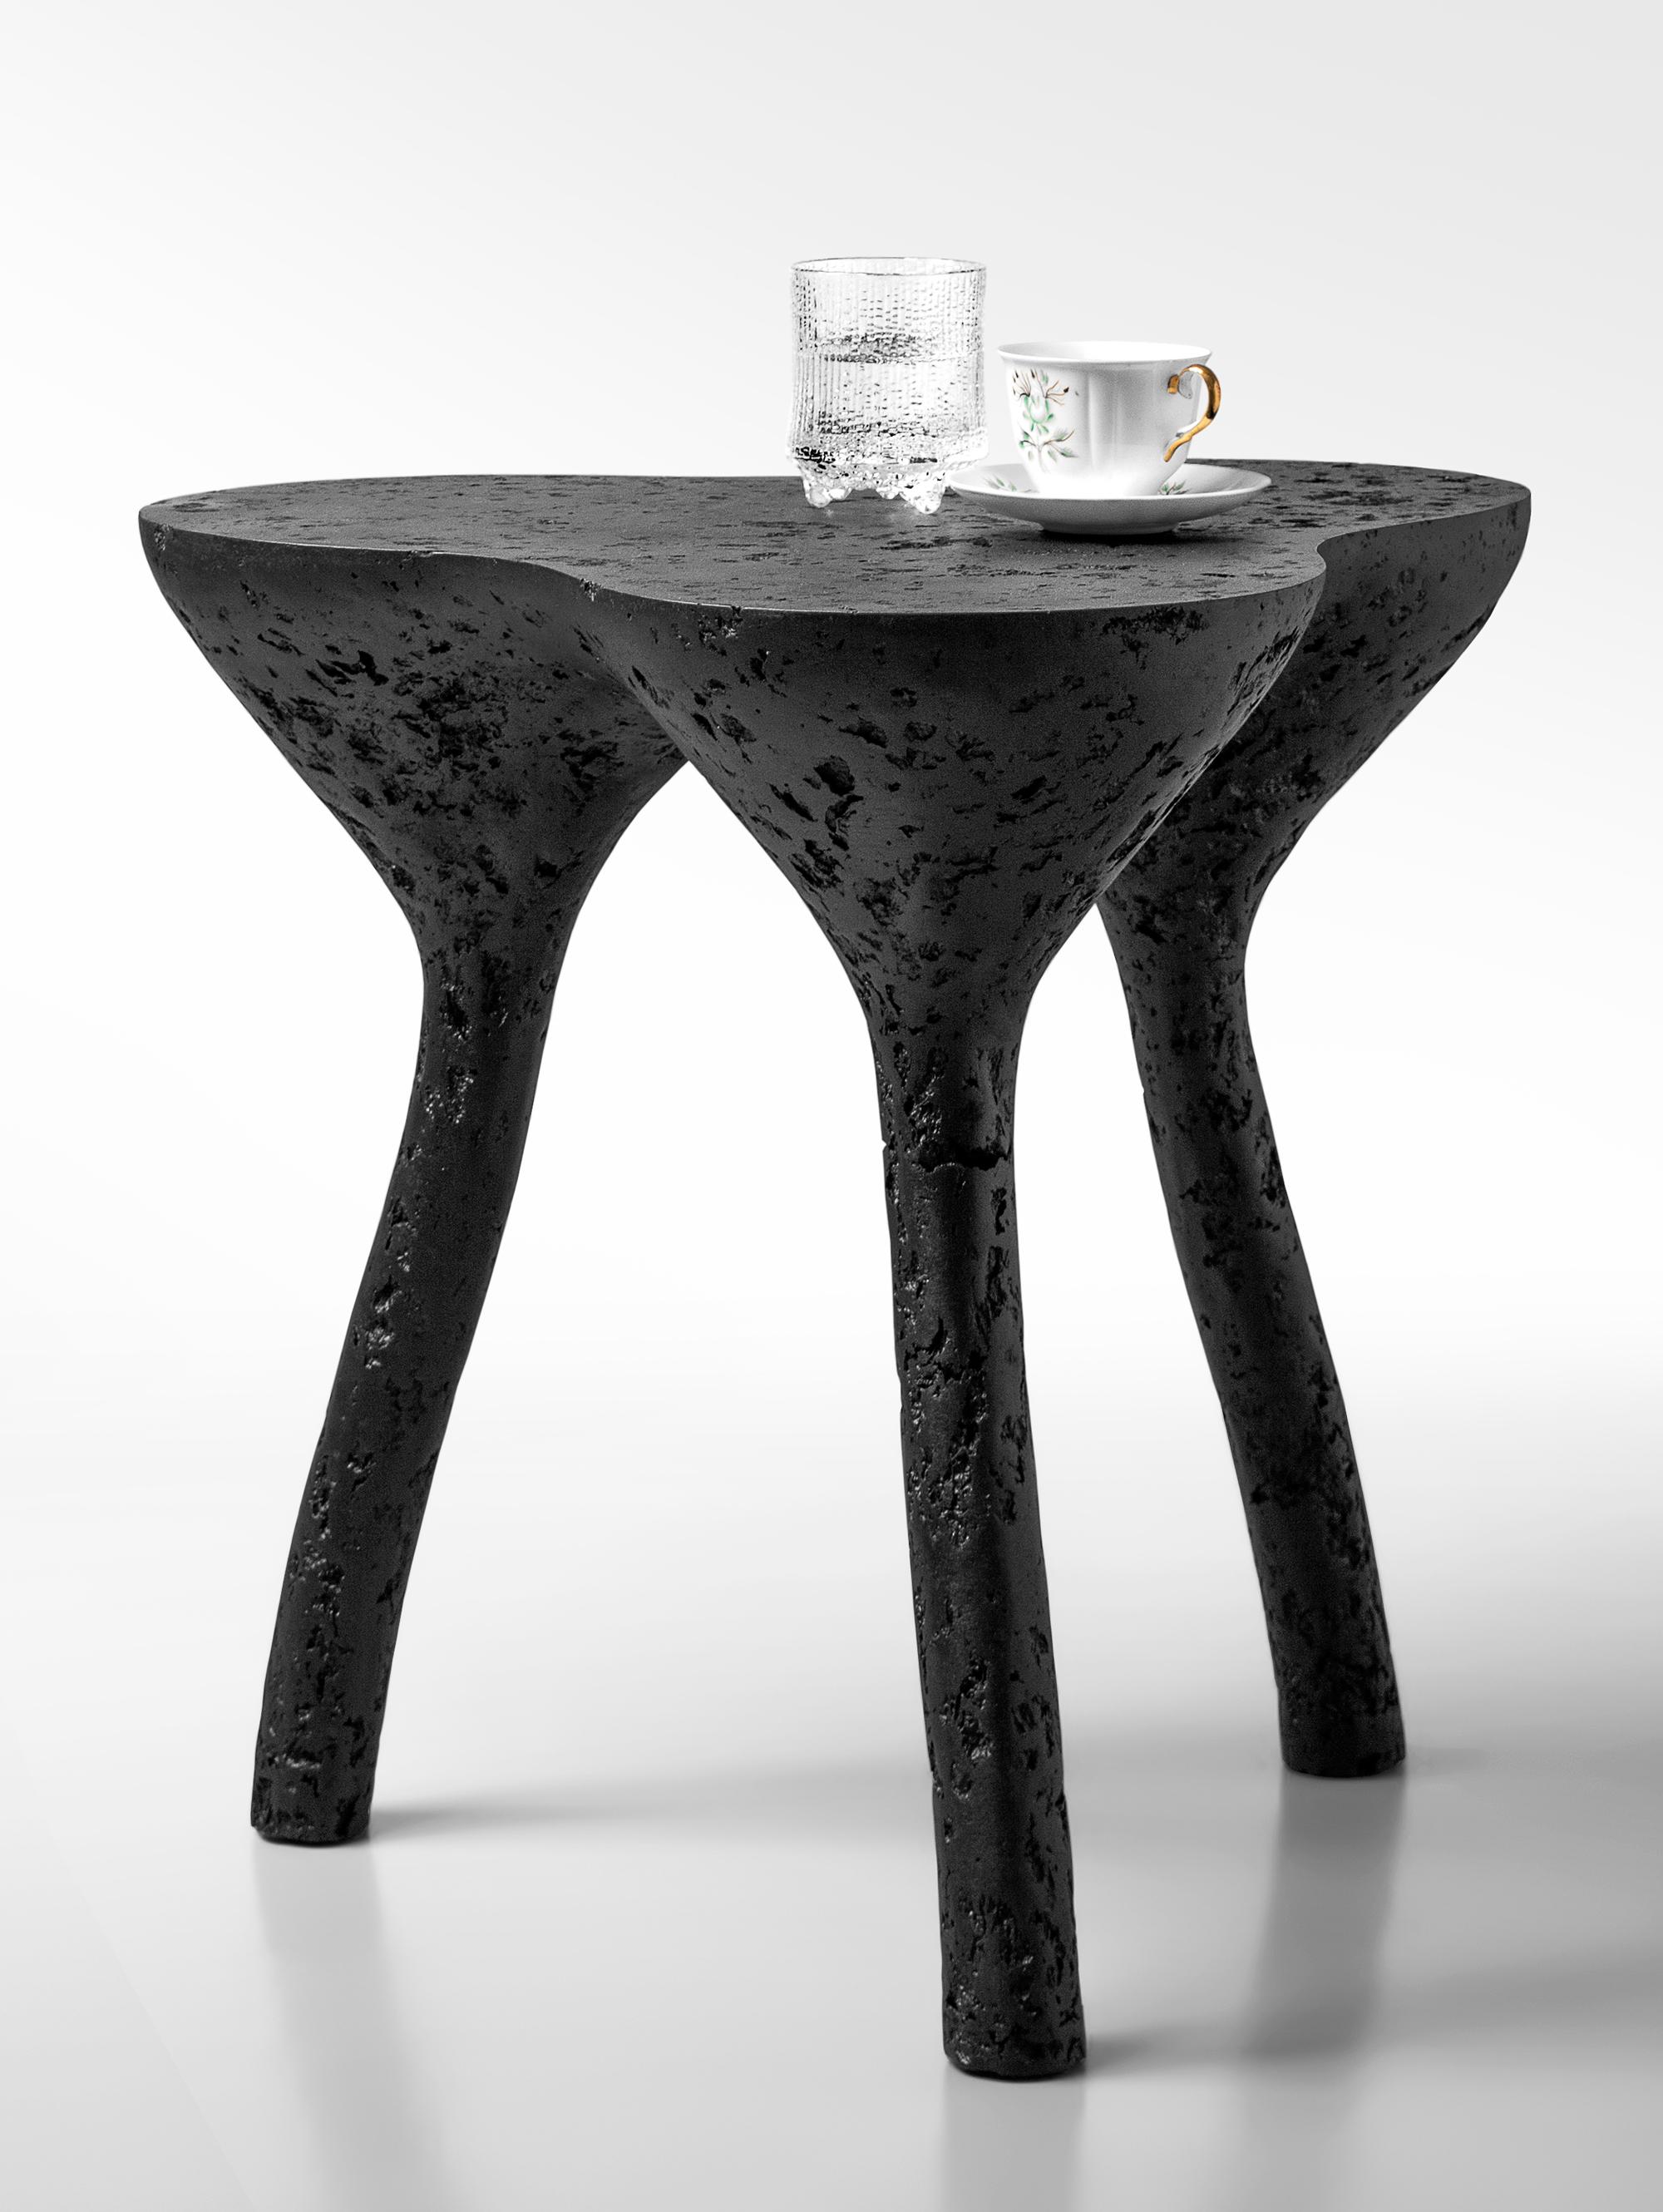 Tripod Coffee Table by Kasanai
Dimensions: D 50 x H 52 cm.
Materials: Concrete, wood, recycled paper, glue, paint
6 kg.

The fusion of sturdiness and elegance, along with the blend of archaism and modernity. More than just a surface for placing